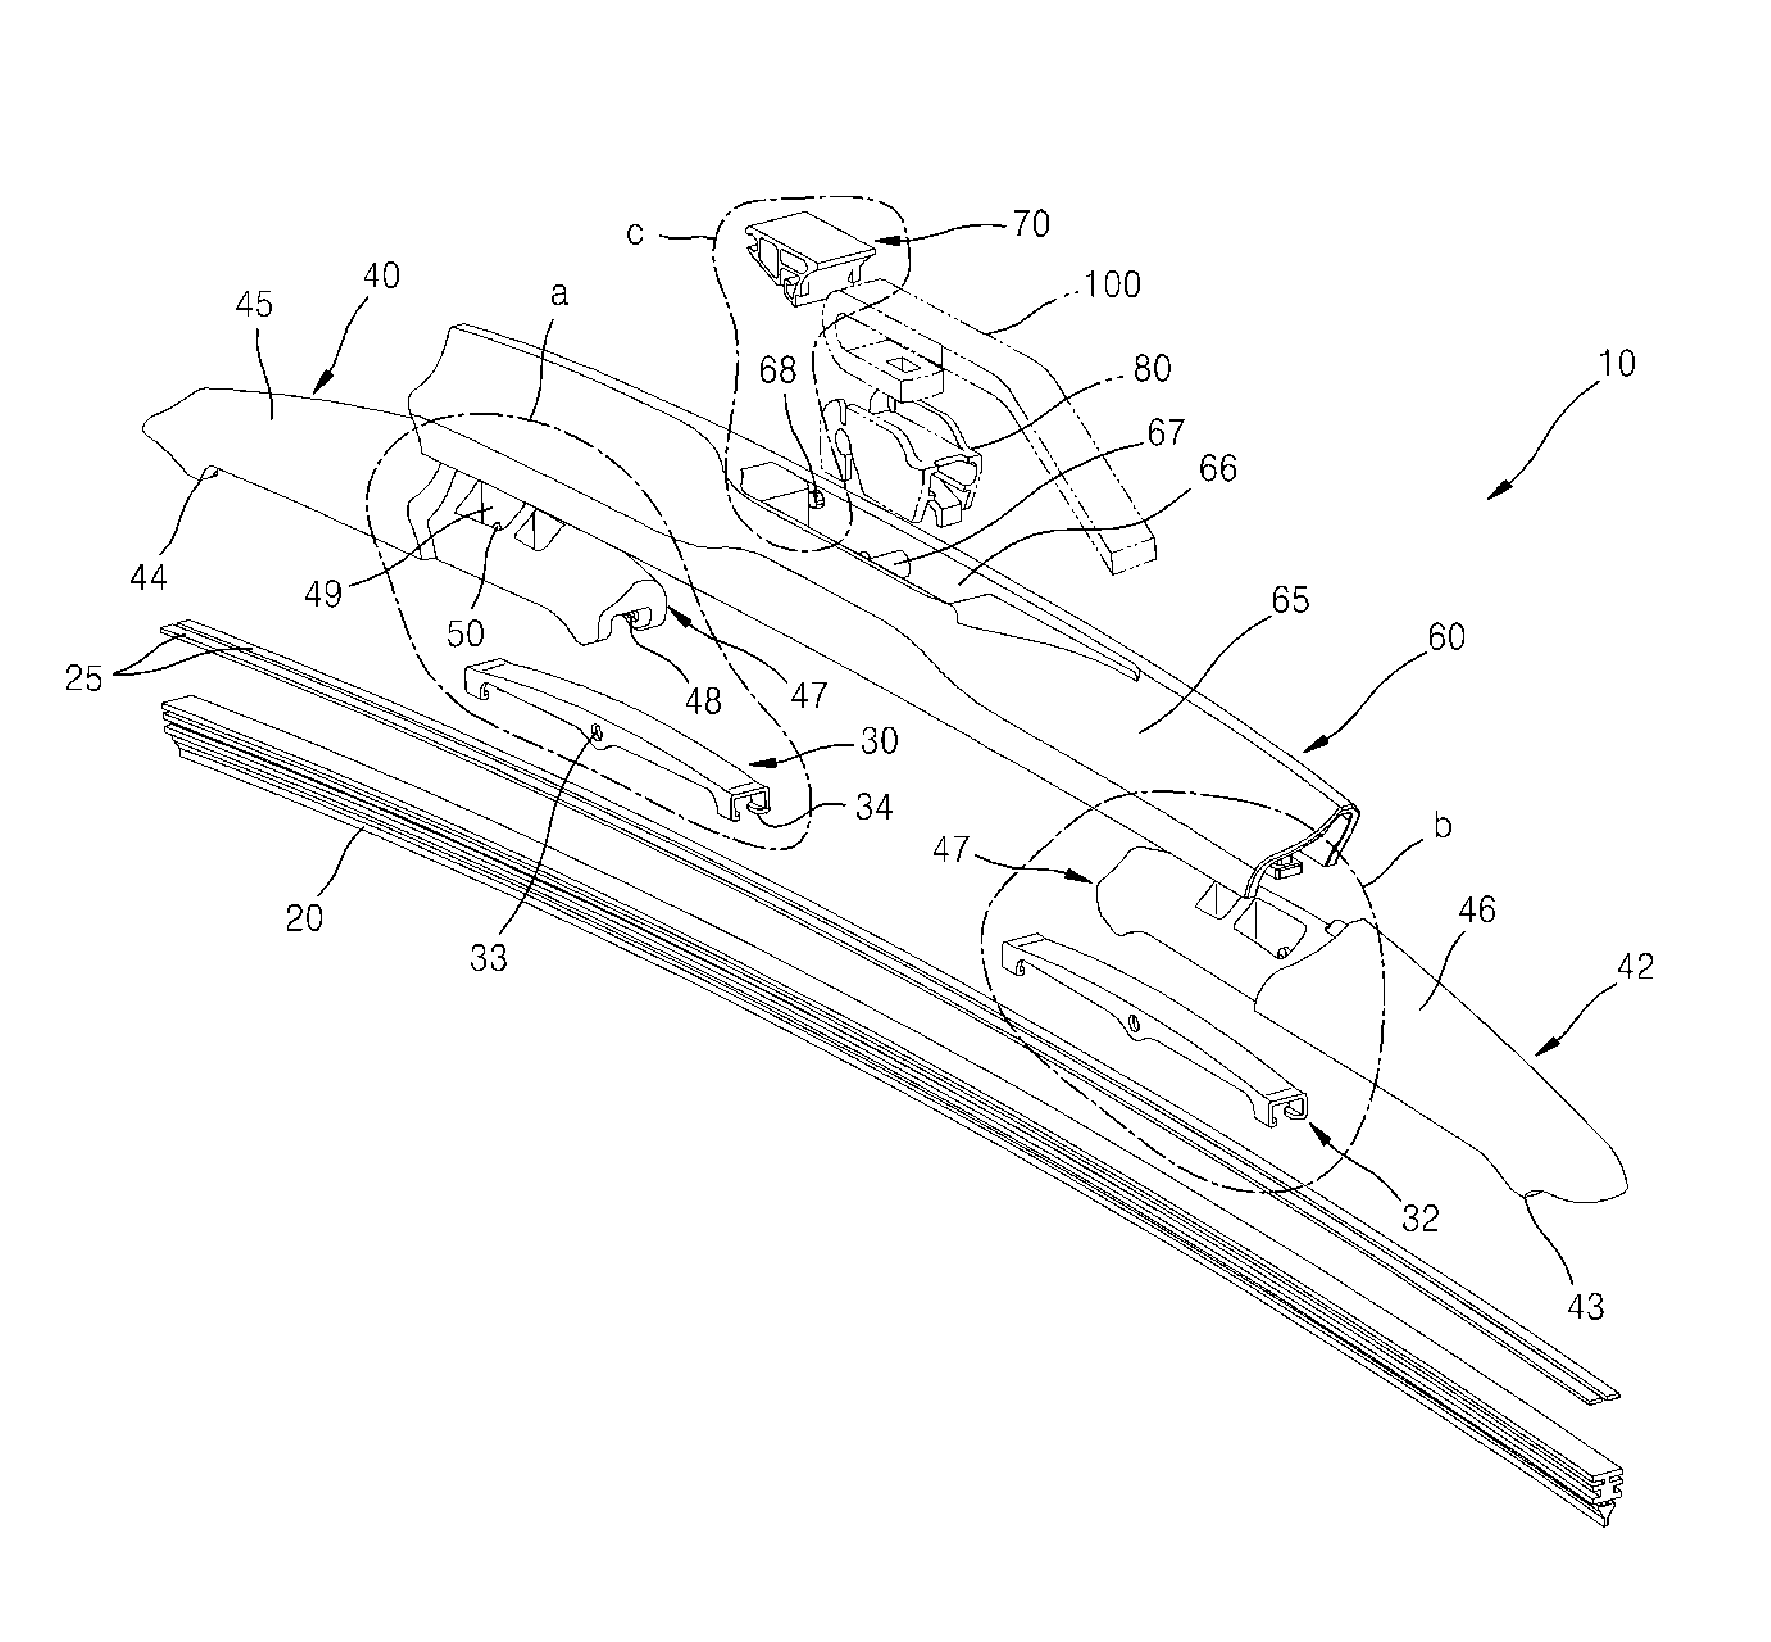 Wiper for vehicle having improved assembling efficiency and reduced weight